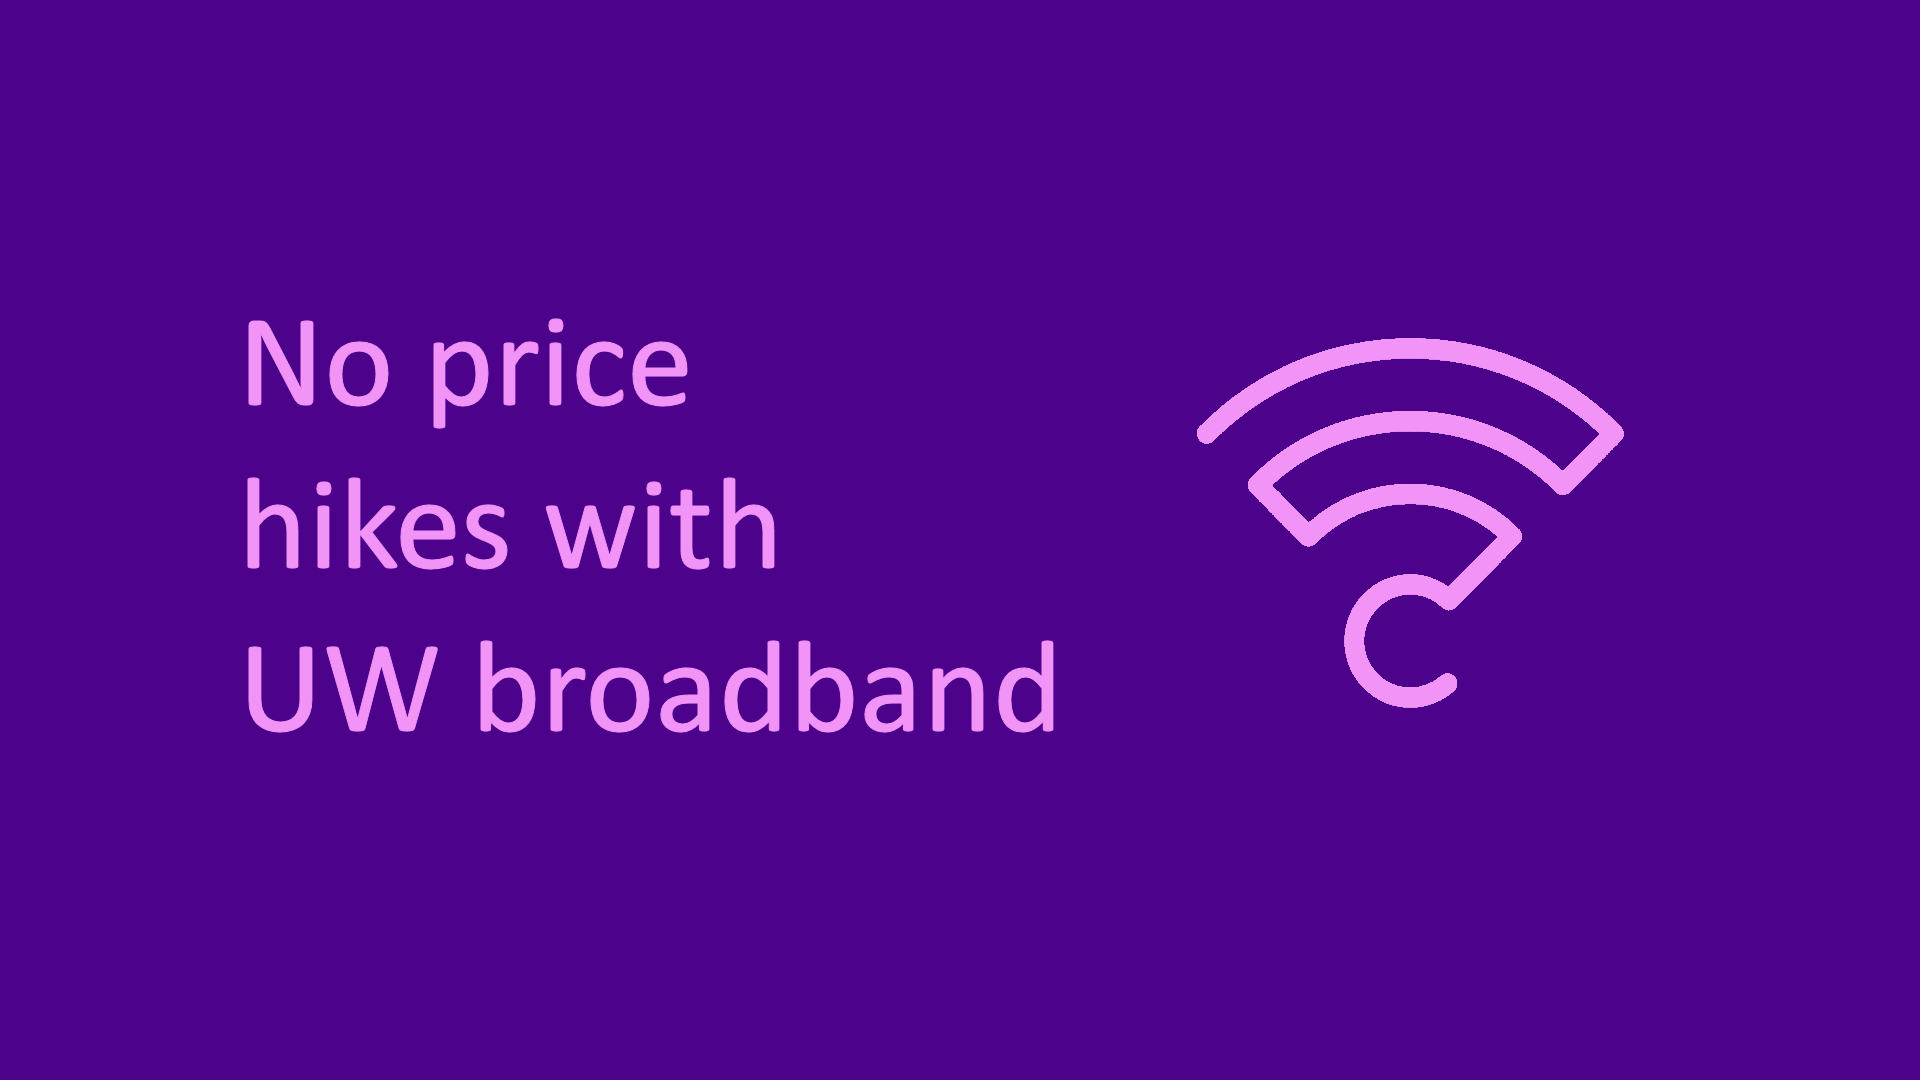 no low introductory offers or price hikes with UW broadband